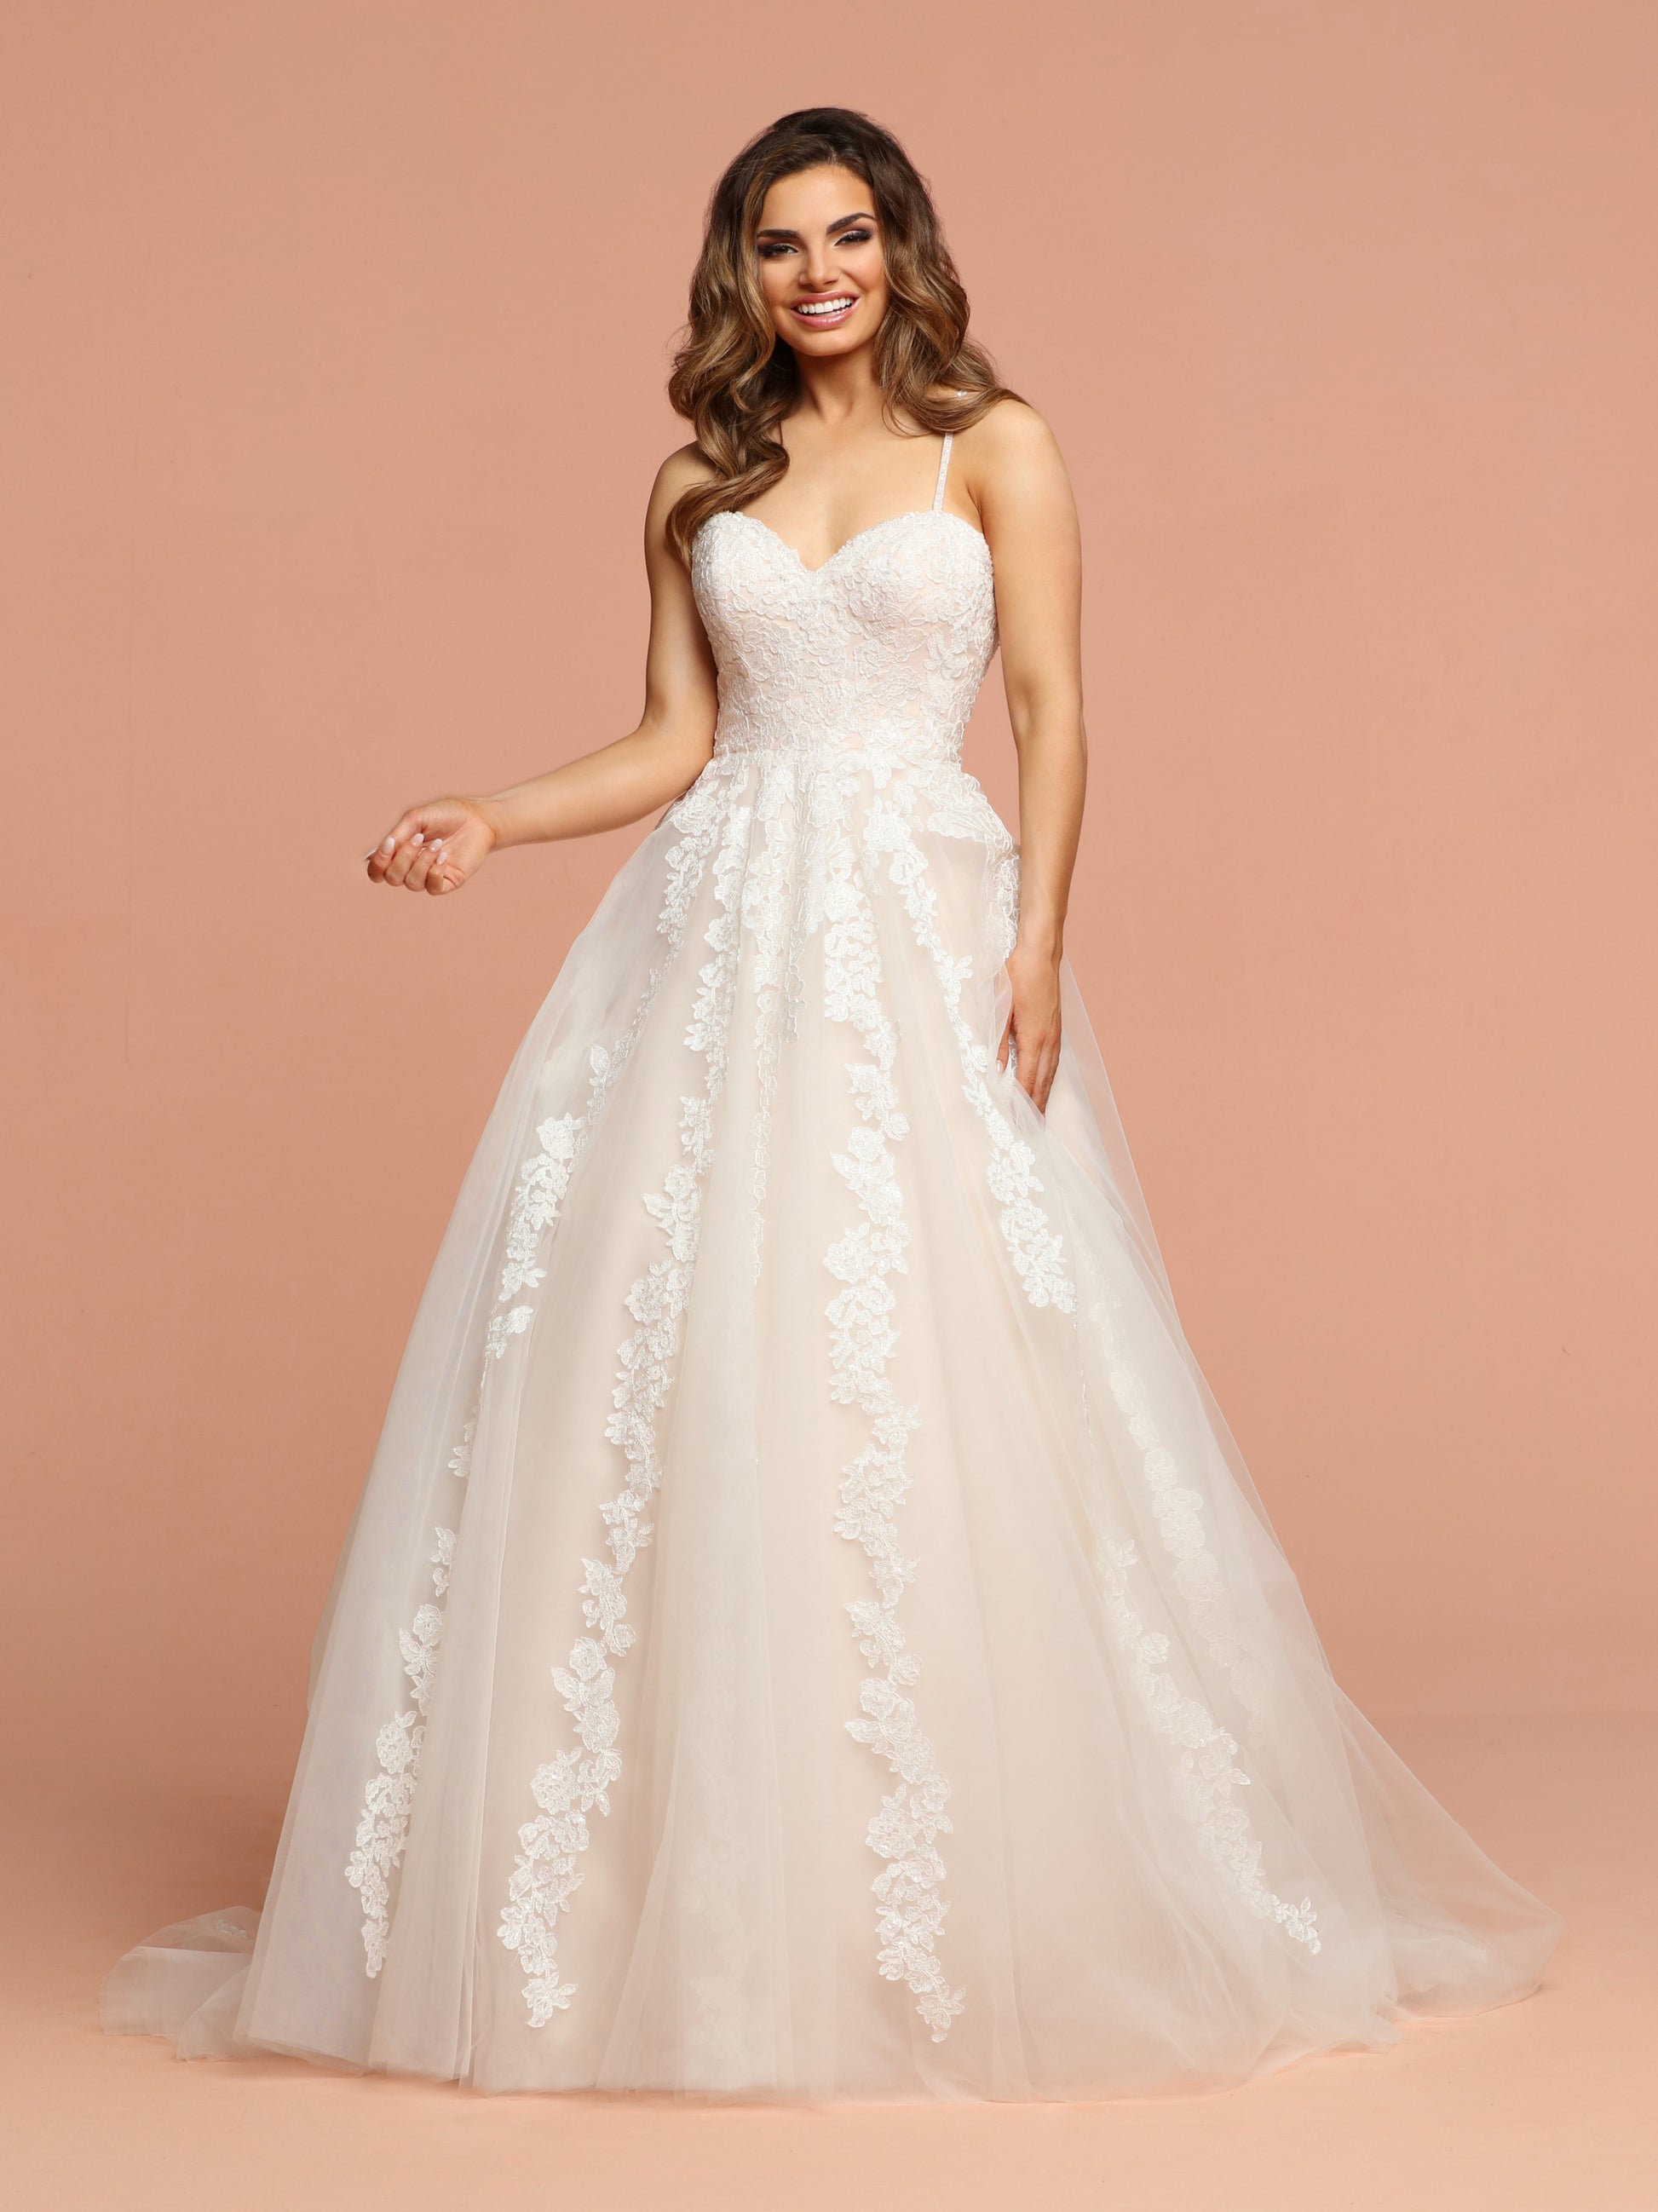 Davinci Bridal 50583 is a Full tulle Ballgown Wedding Dress with a train. Featuring a Strapless sweetheart lace bodice with lace cascading down into the skirt. Open Back with cross cross straps.  Available for 1-2 Week Delivery!!!  Available Sizes: 2,4,6,8,10,12,14,16,18,20  Available Colors: Ivory/Blush, Ivory/Ivory